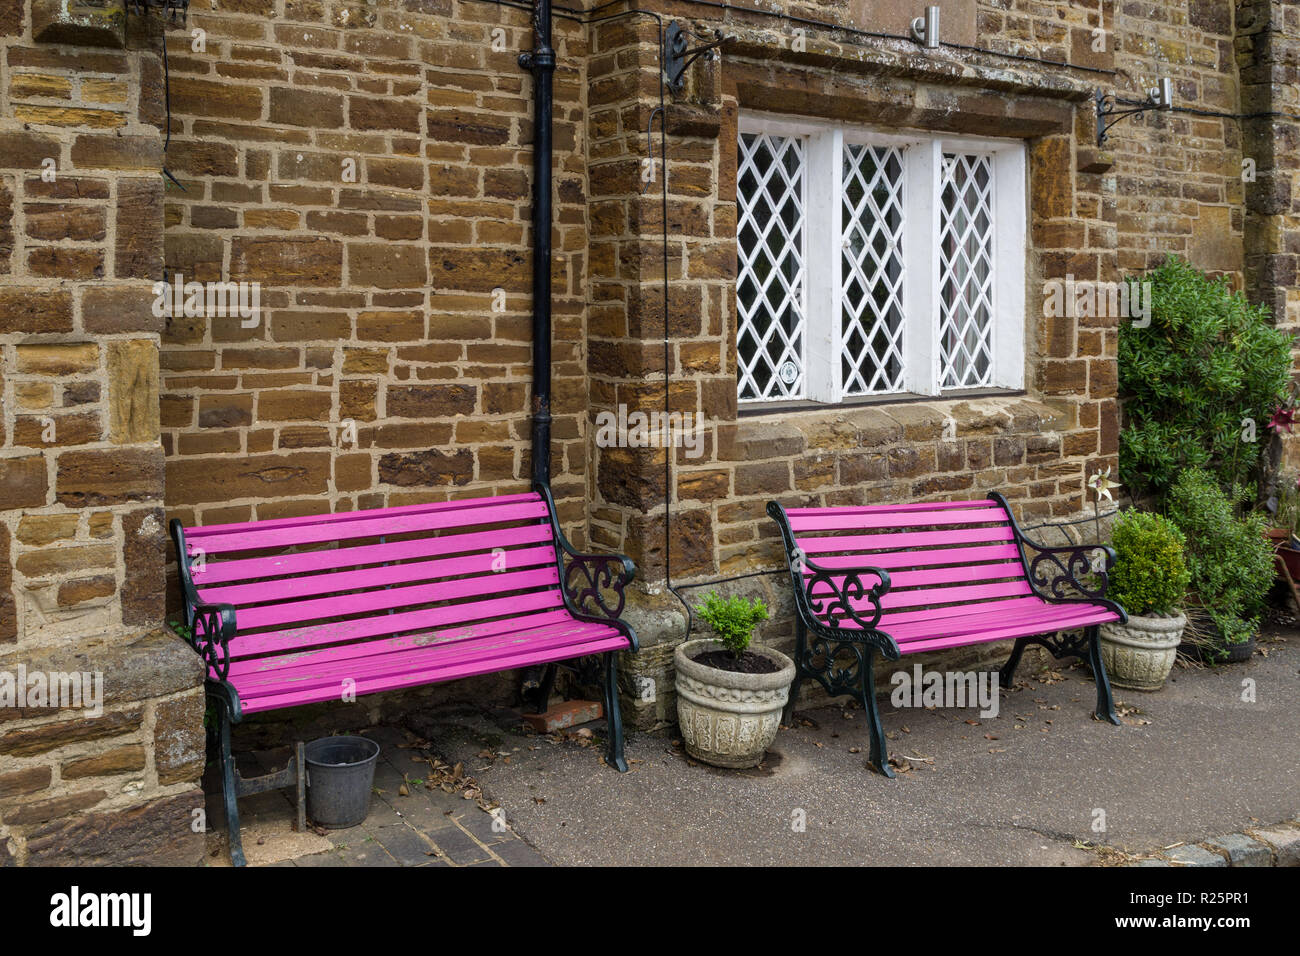 Colourful pink garden benches set against an ironstone wall, Kings Arms pub, Farthingstone, Northamptonshire, England, UK Stock Photo